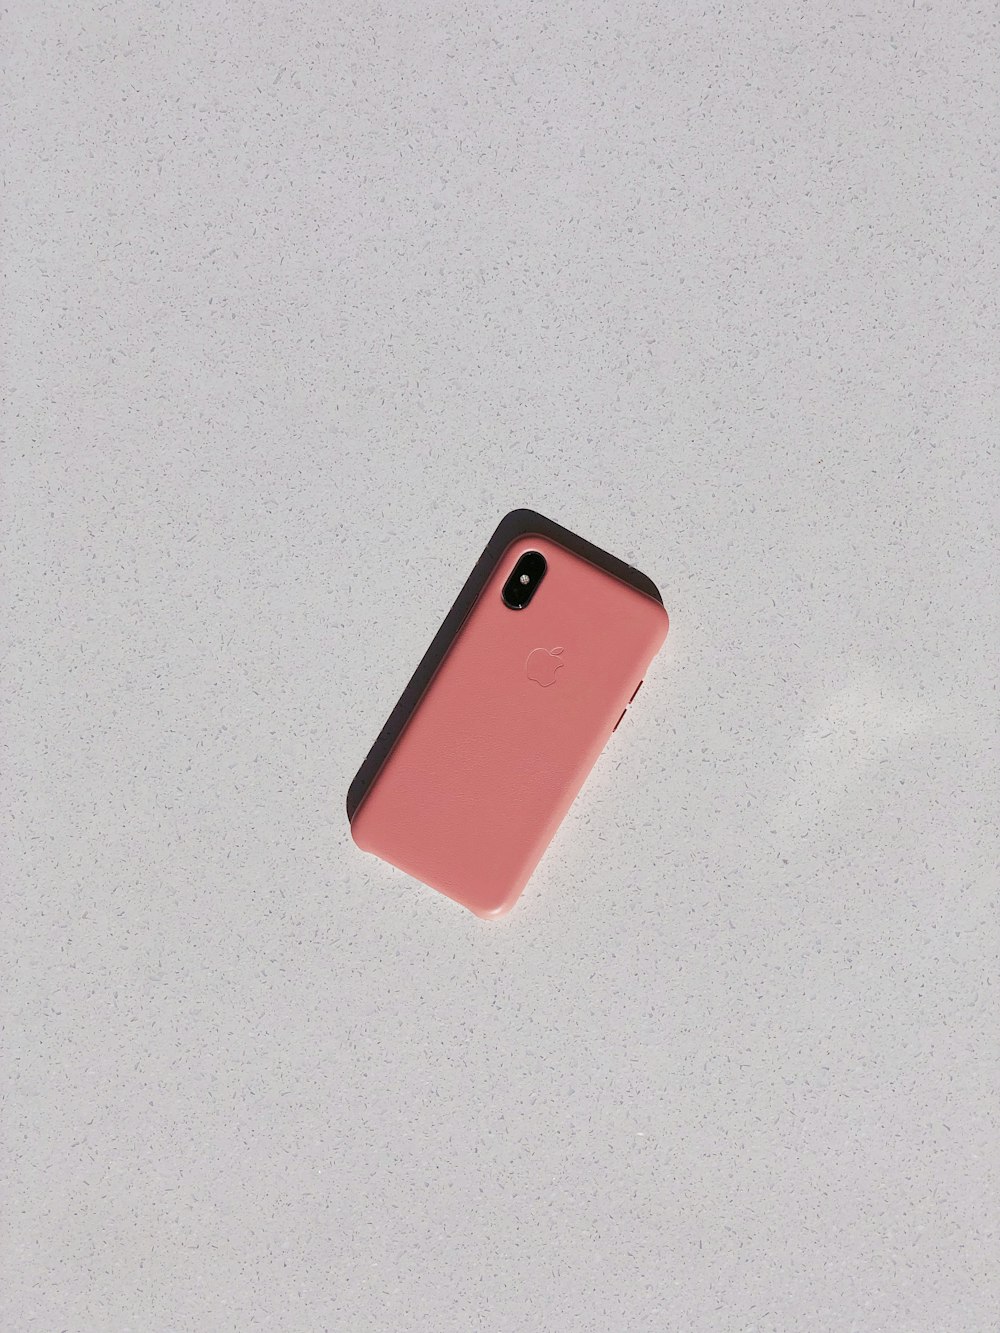 pink Android smartphone close-up photography